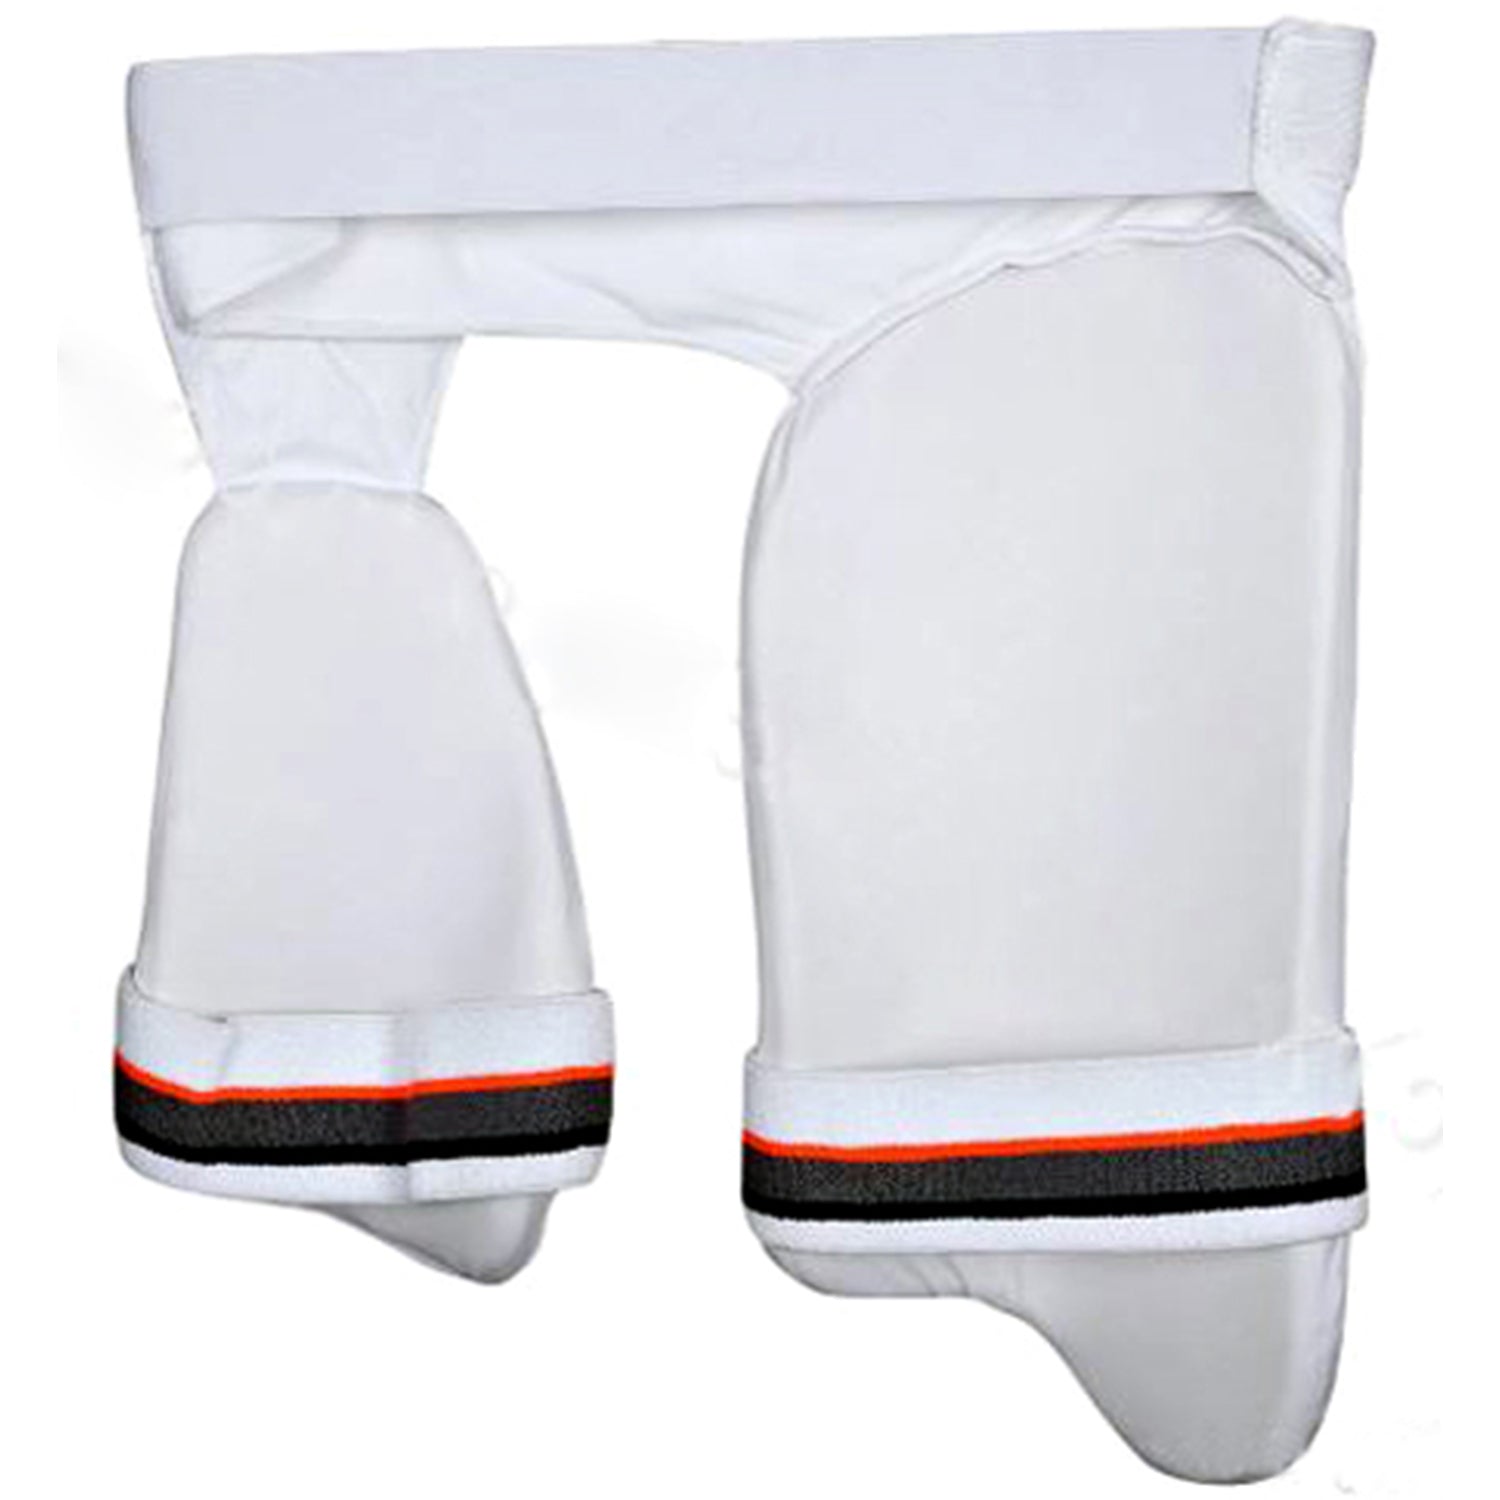 SG Ultimate (Combo) Left Hand Thigh Pads, - Best Price online Prokicksports.com